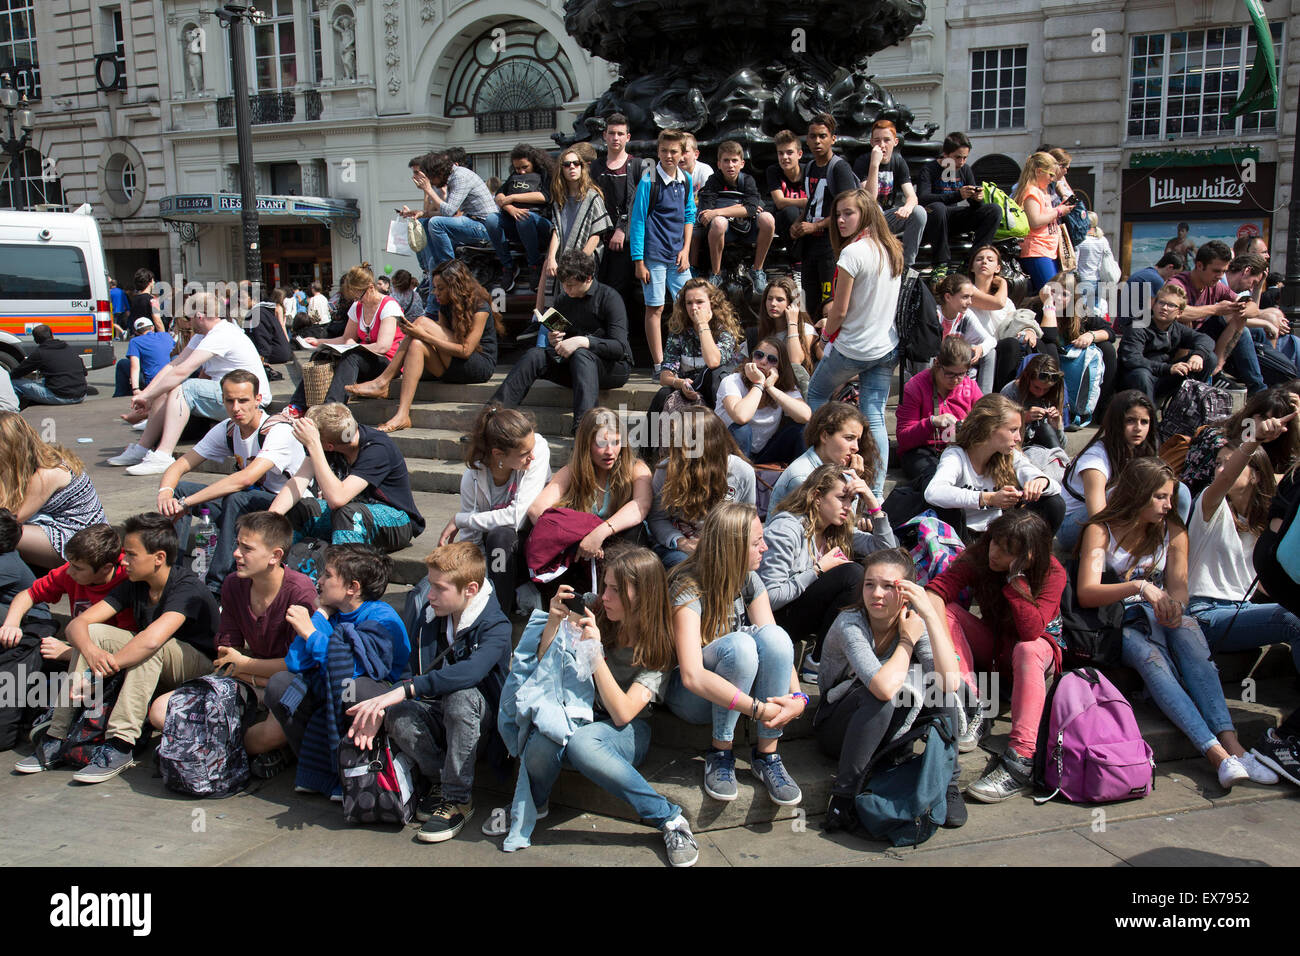 Summertime in London, England, UK. Student tourists gather en masse at the base of Eros in Piccadilly Circus. Stock Photo